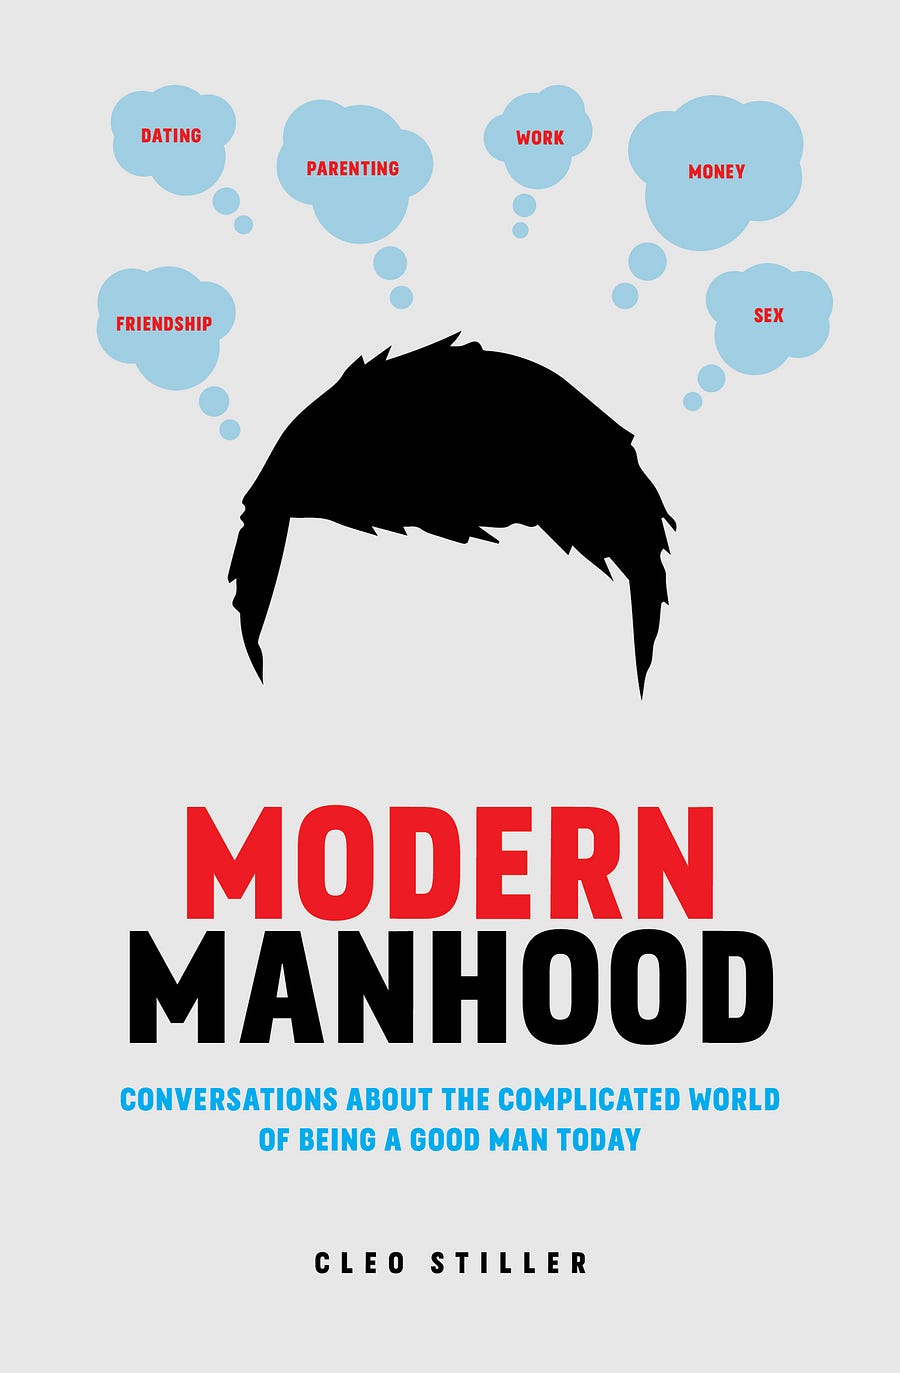 The Cover of the book Modern Manhood, by Cleo Stiller